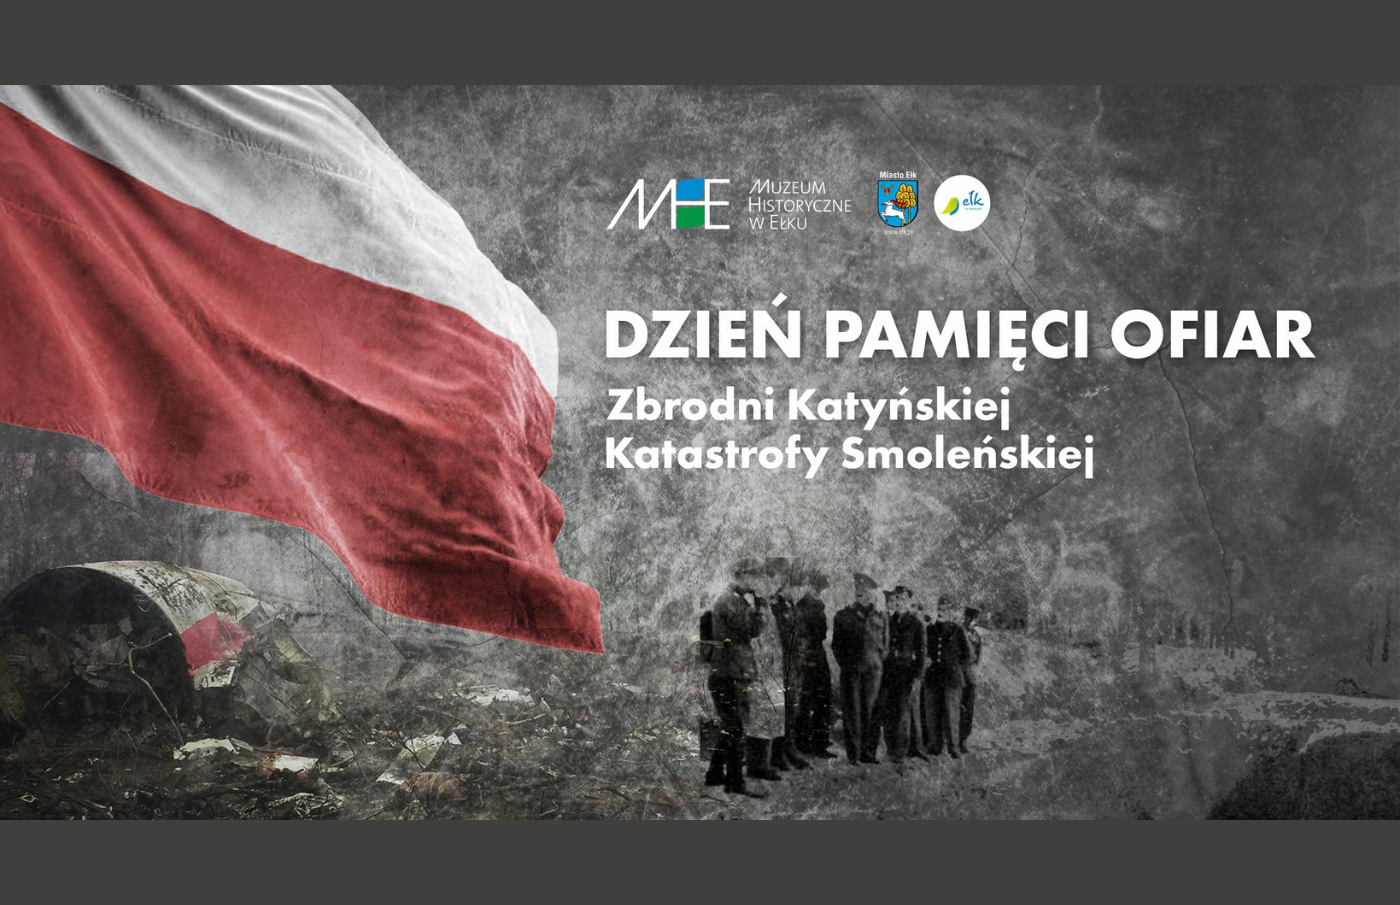 Celebration of the Day of Remembrance of the Victims of the Katyn Massacre and the Smolensk Catastrophe